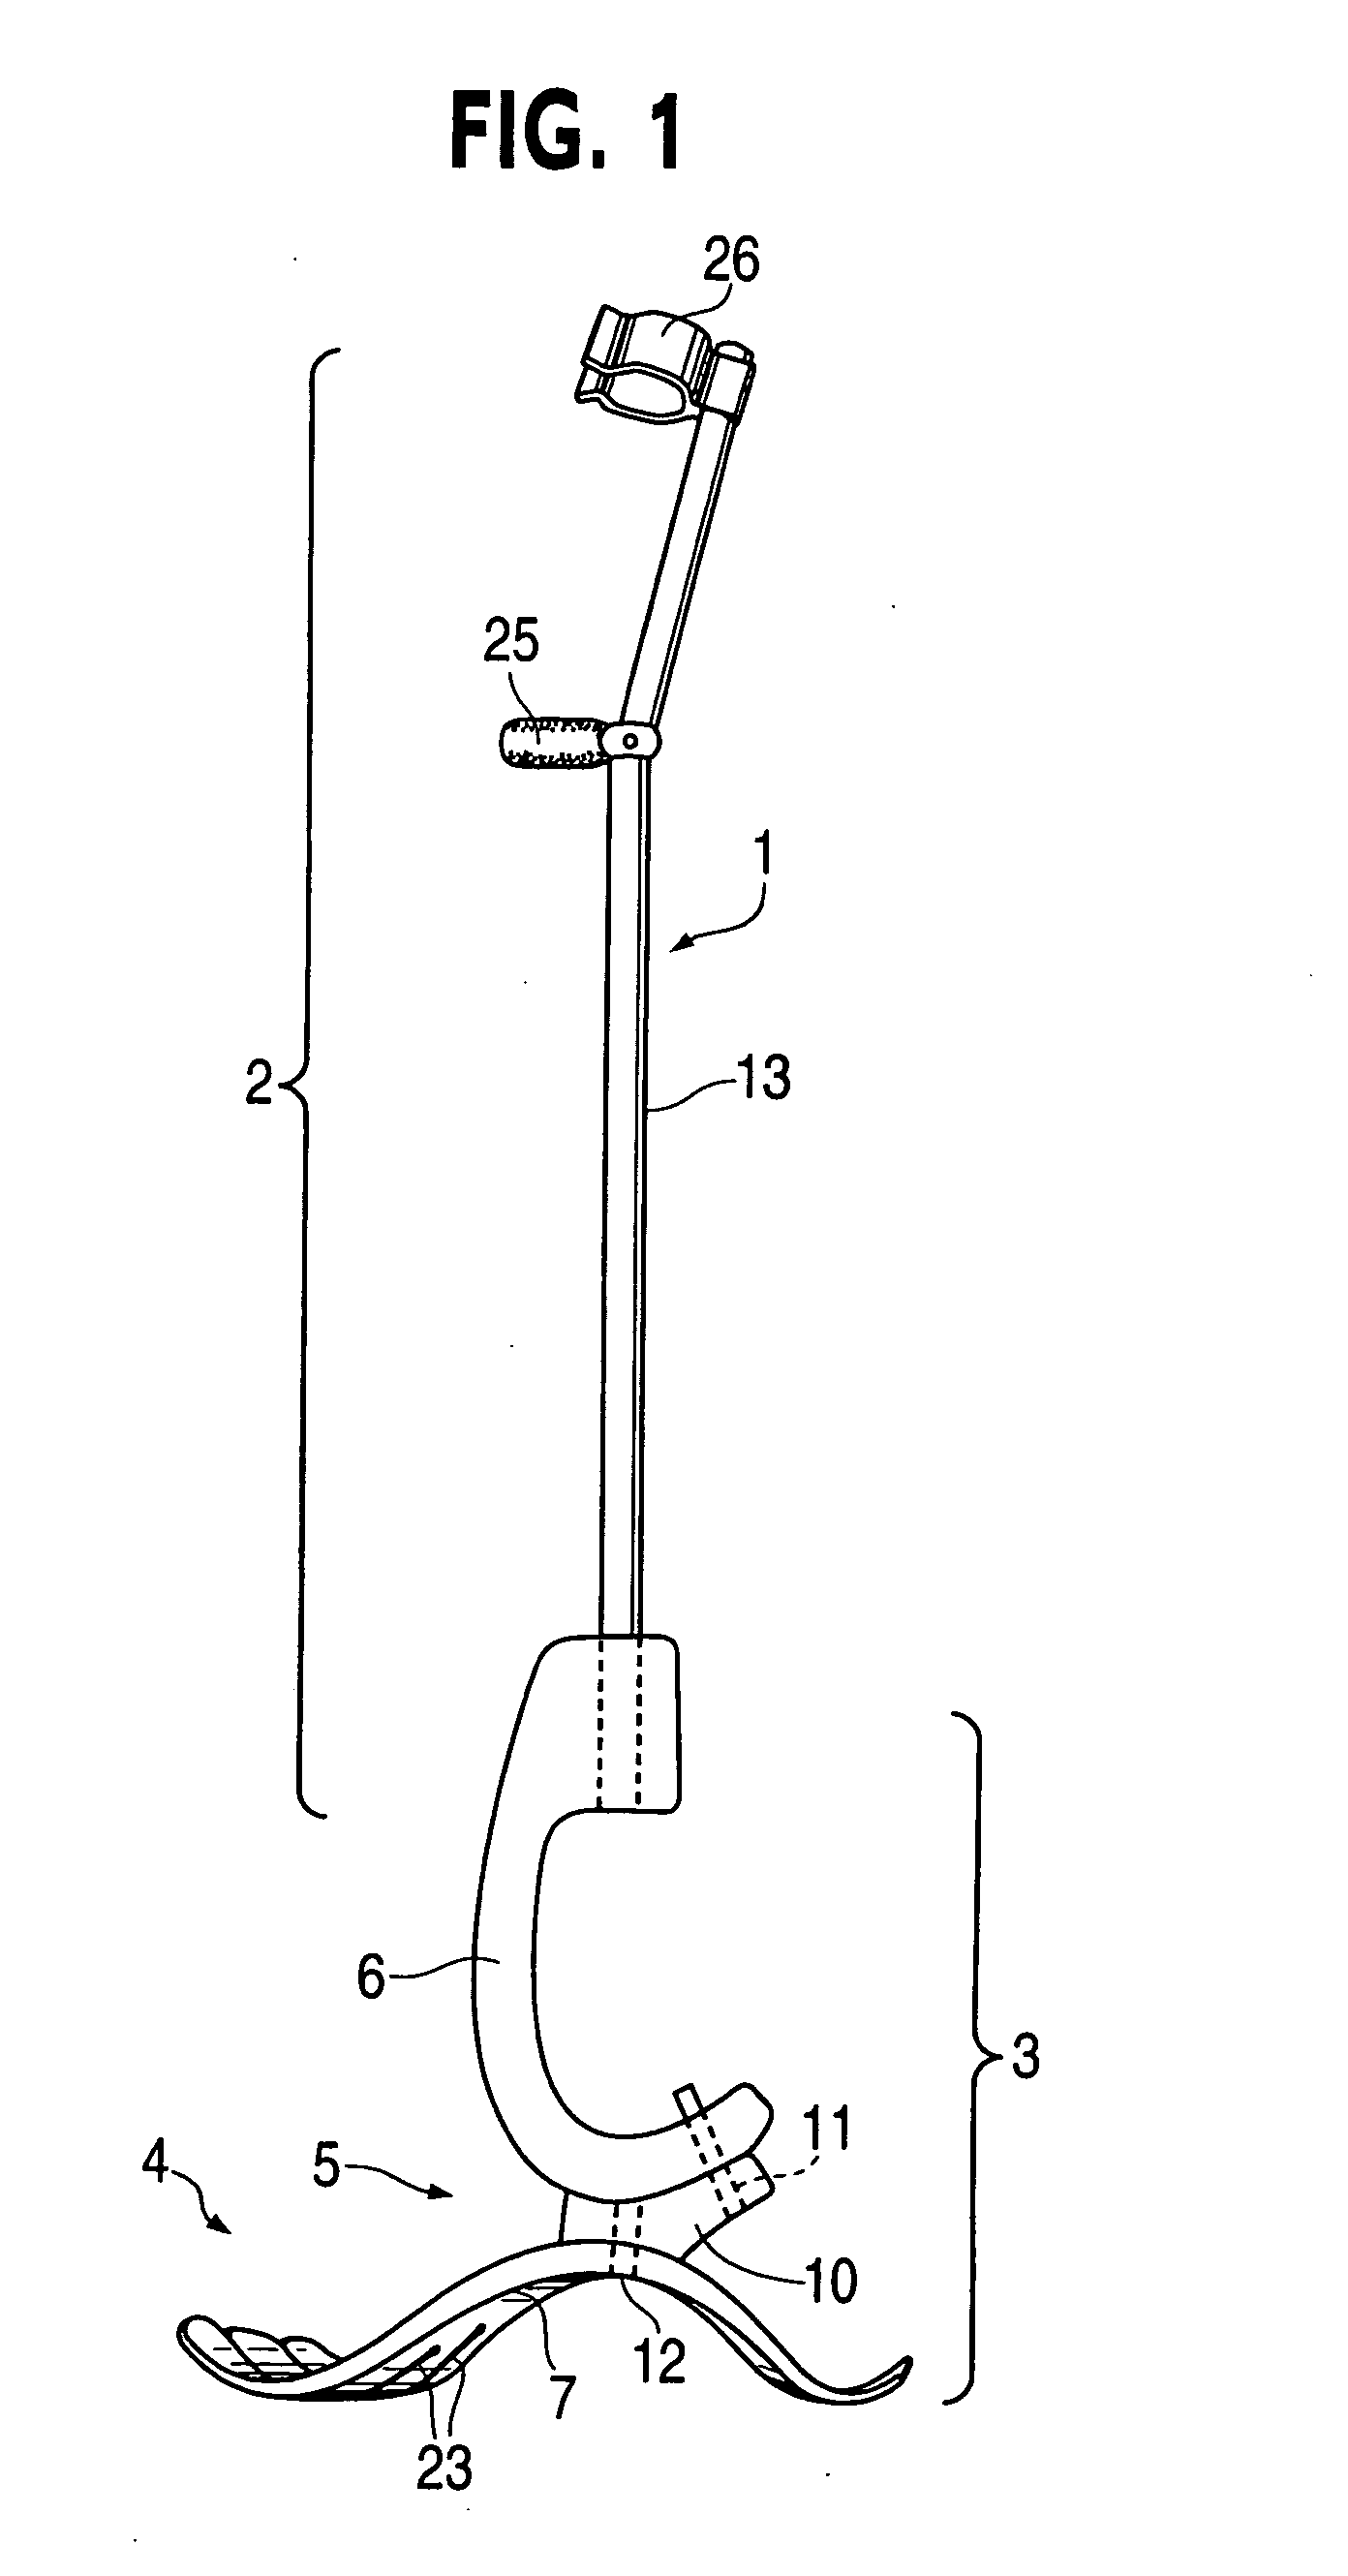 Mobility assistance apparatus and method